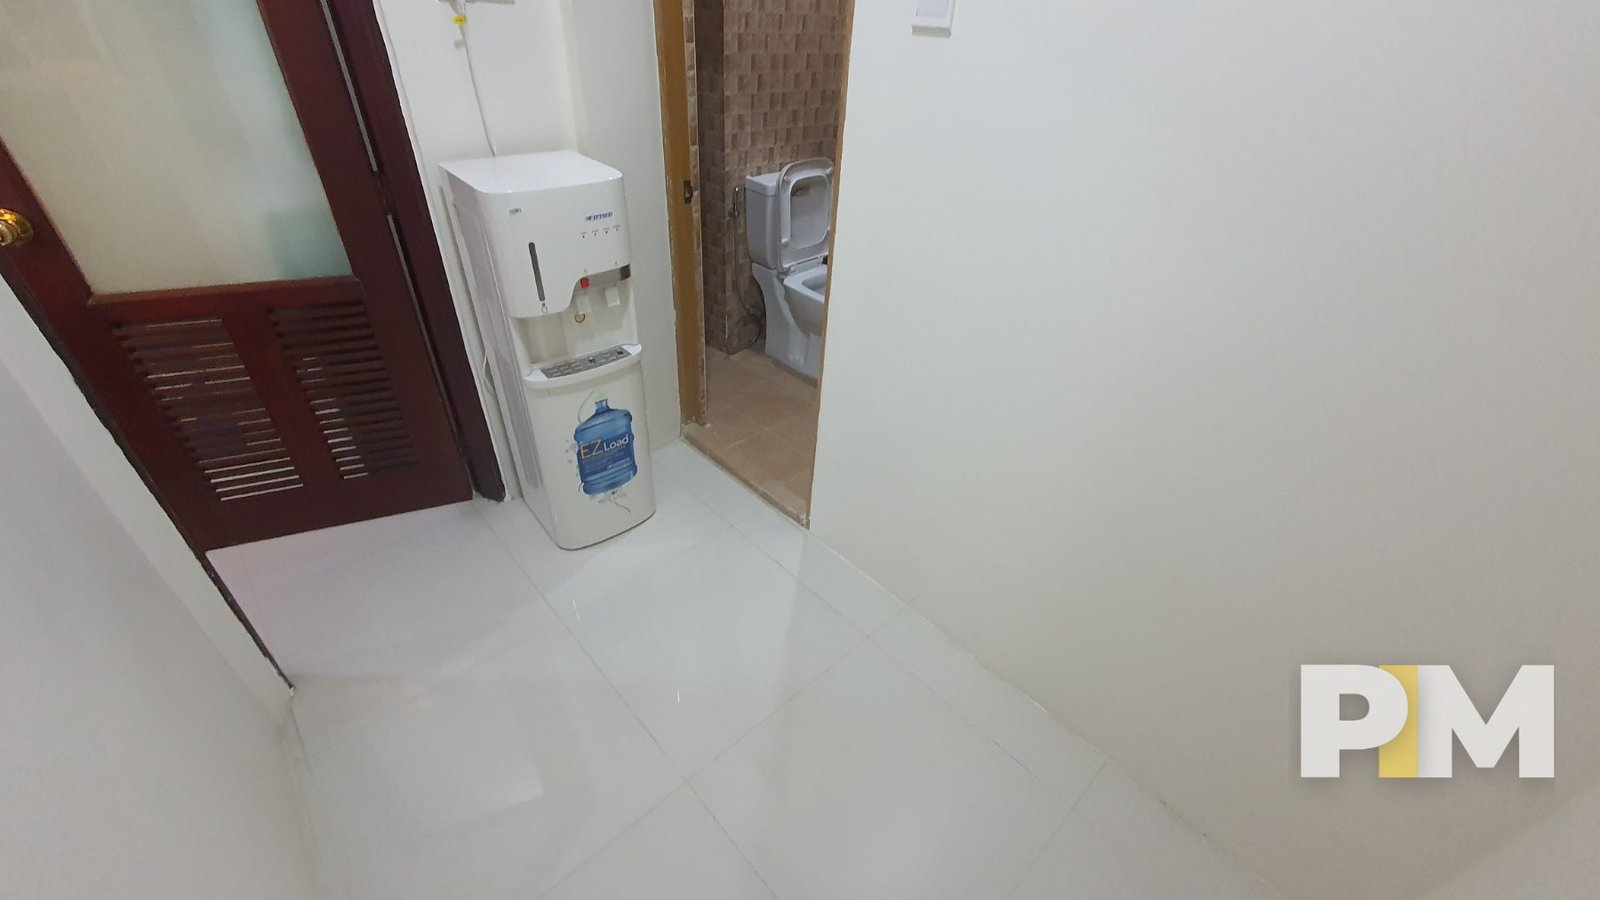 utility room - property for rent in myanmar